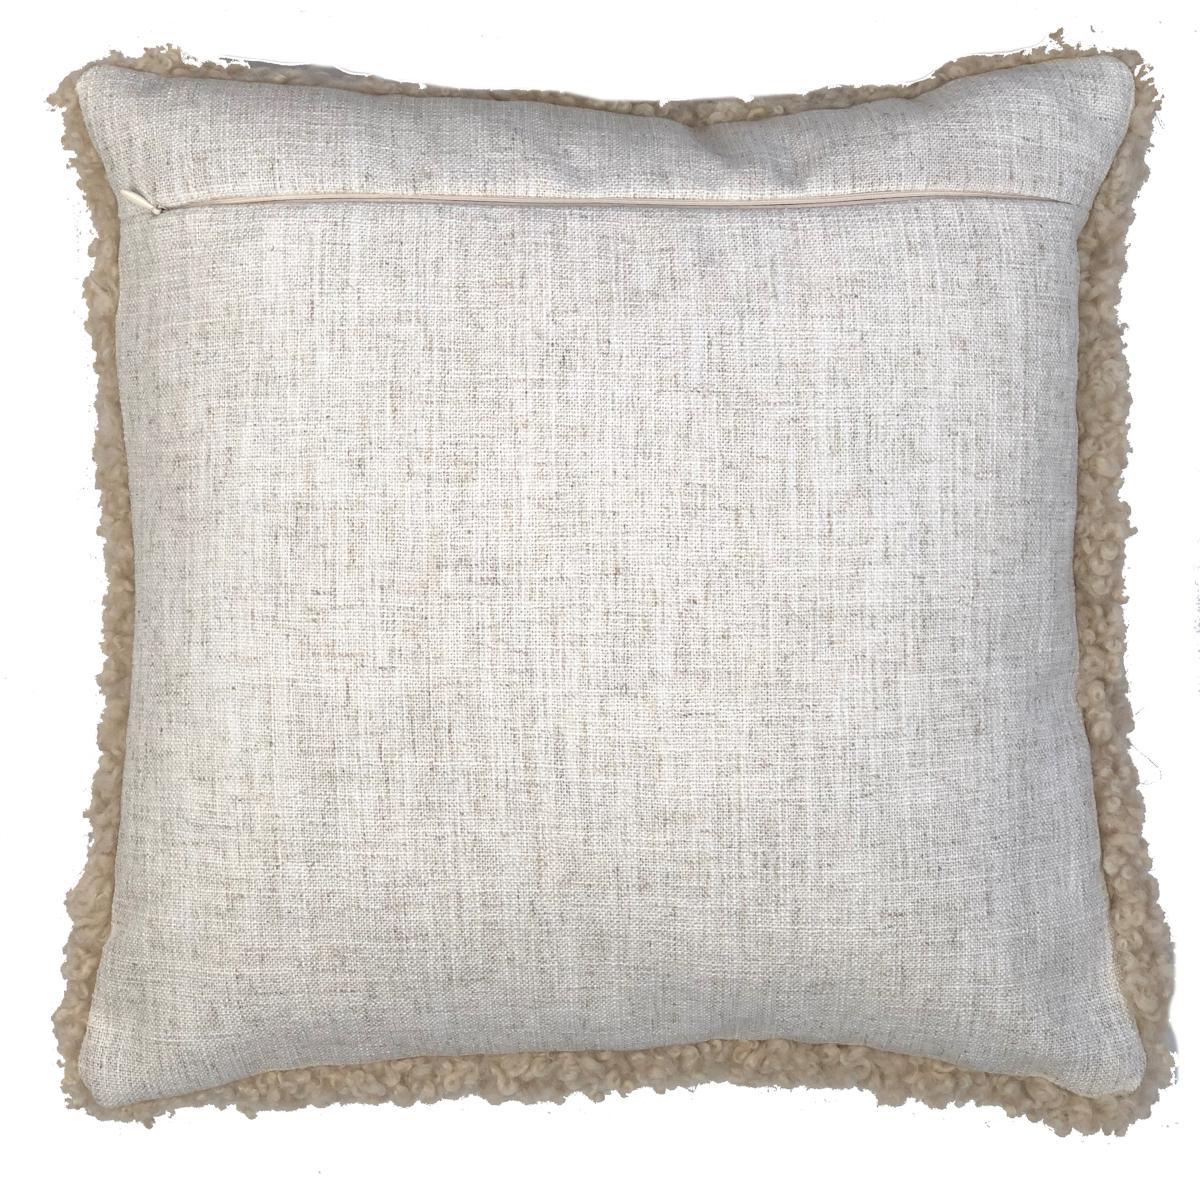 Add layers of natural tactile elements to your bedroom or living decor with this captivating Australian shearling sheepskin pillow. The short curly wool pile translates stylish design, comfort and expresses natural signature living.
Limited edition